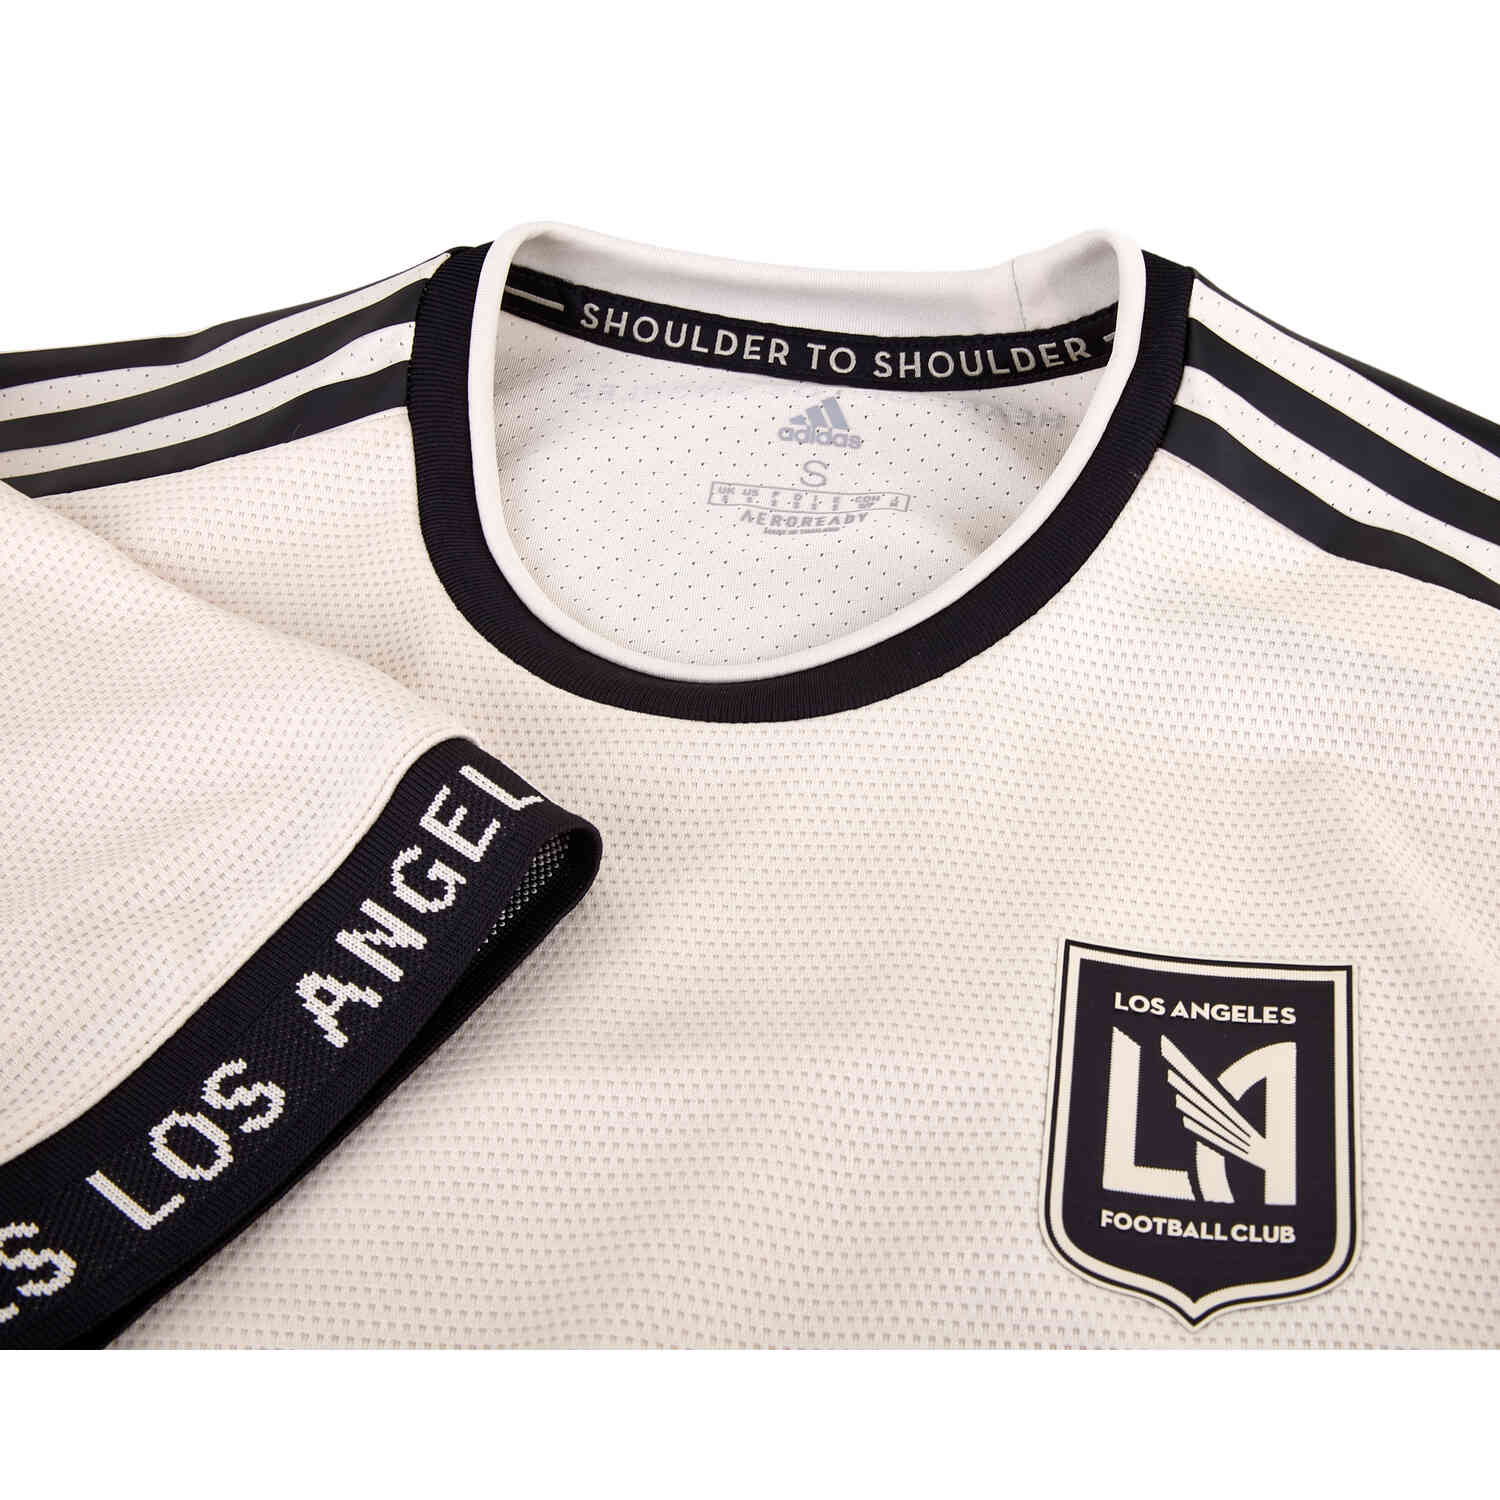 NEW adidas Men's LAFC 2020 Authentic Home Jersey Black/Gold